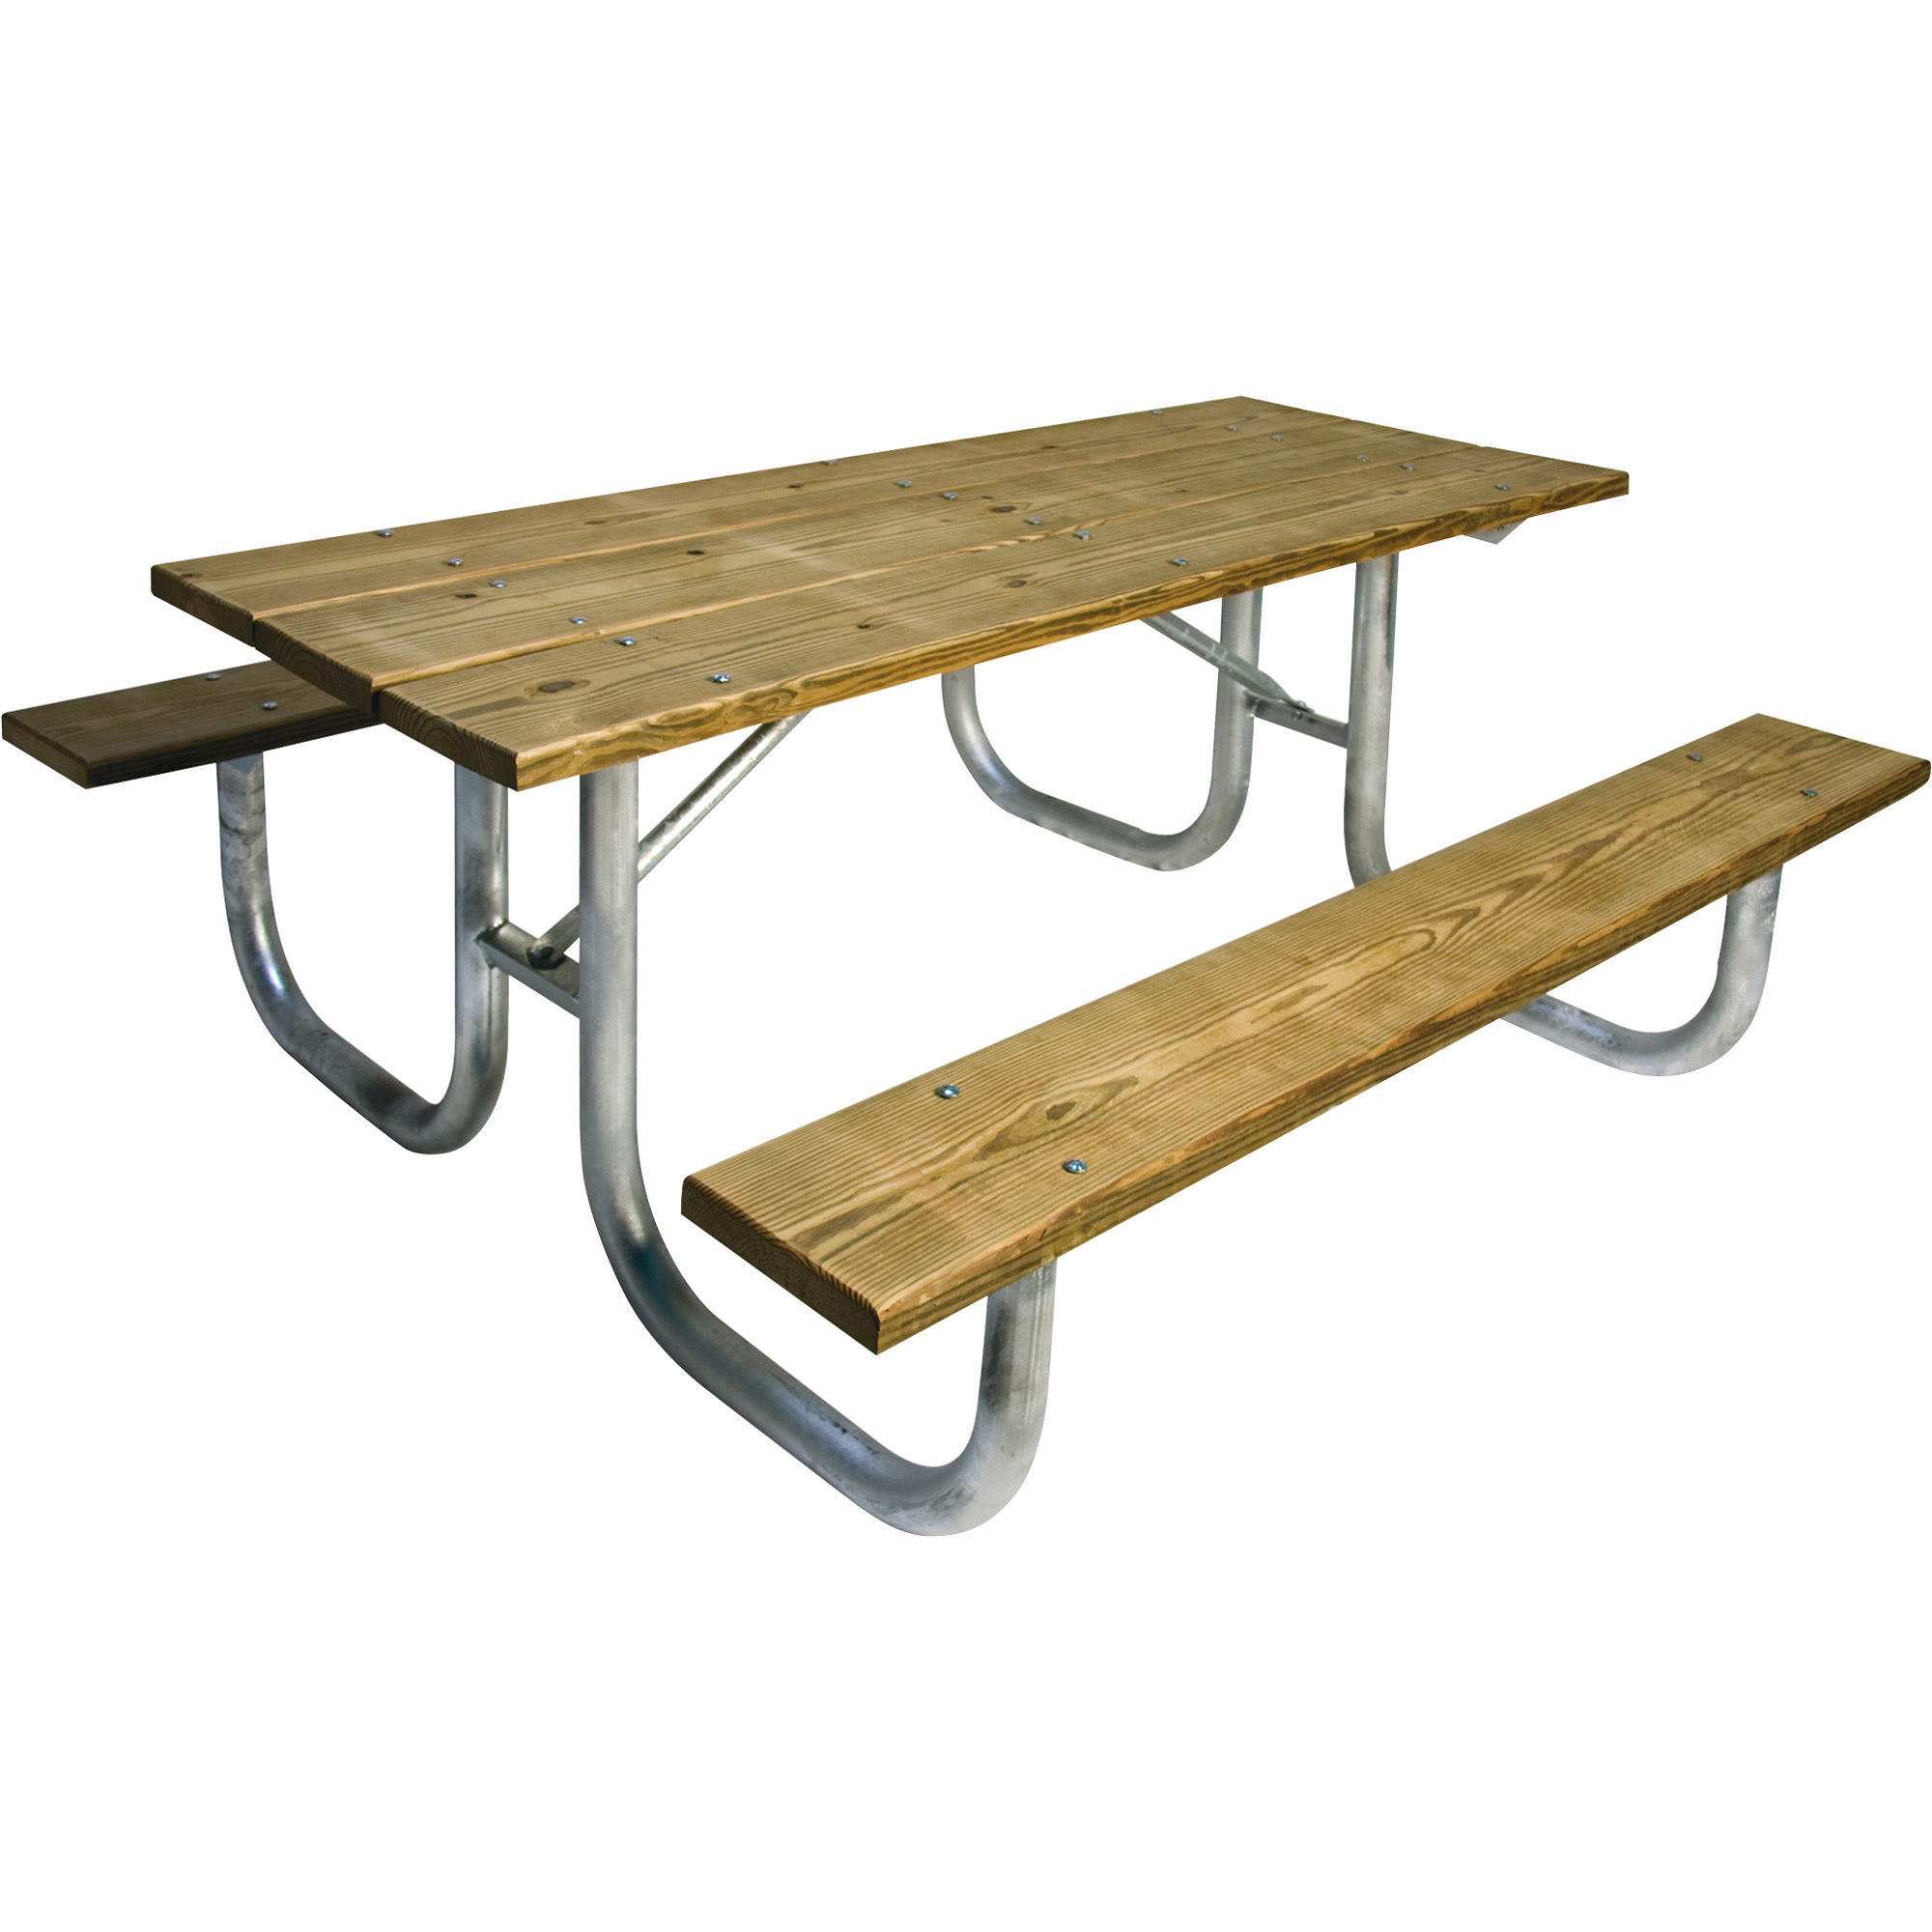 UltraSite 6ft. Pressure Treated Wood Table, Galvanized Frame, 72Inch L x 68Inch W x 30Inch H, Model 238-PT6